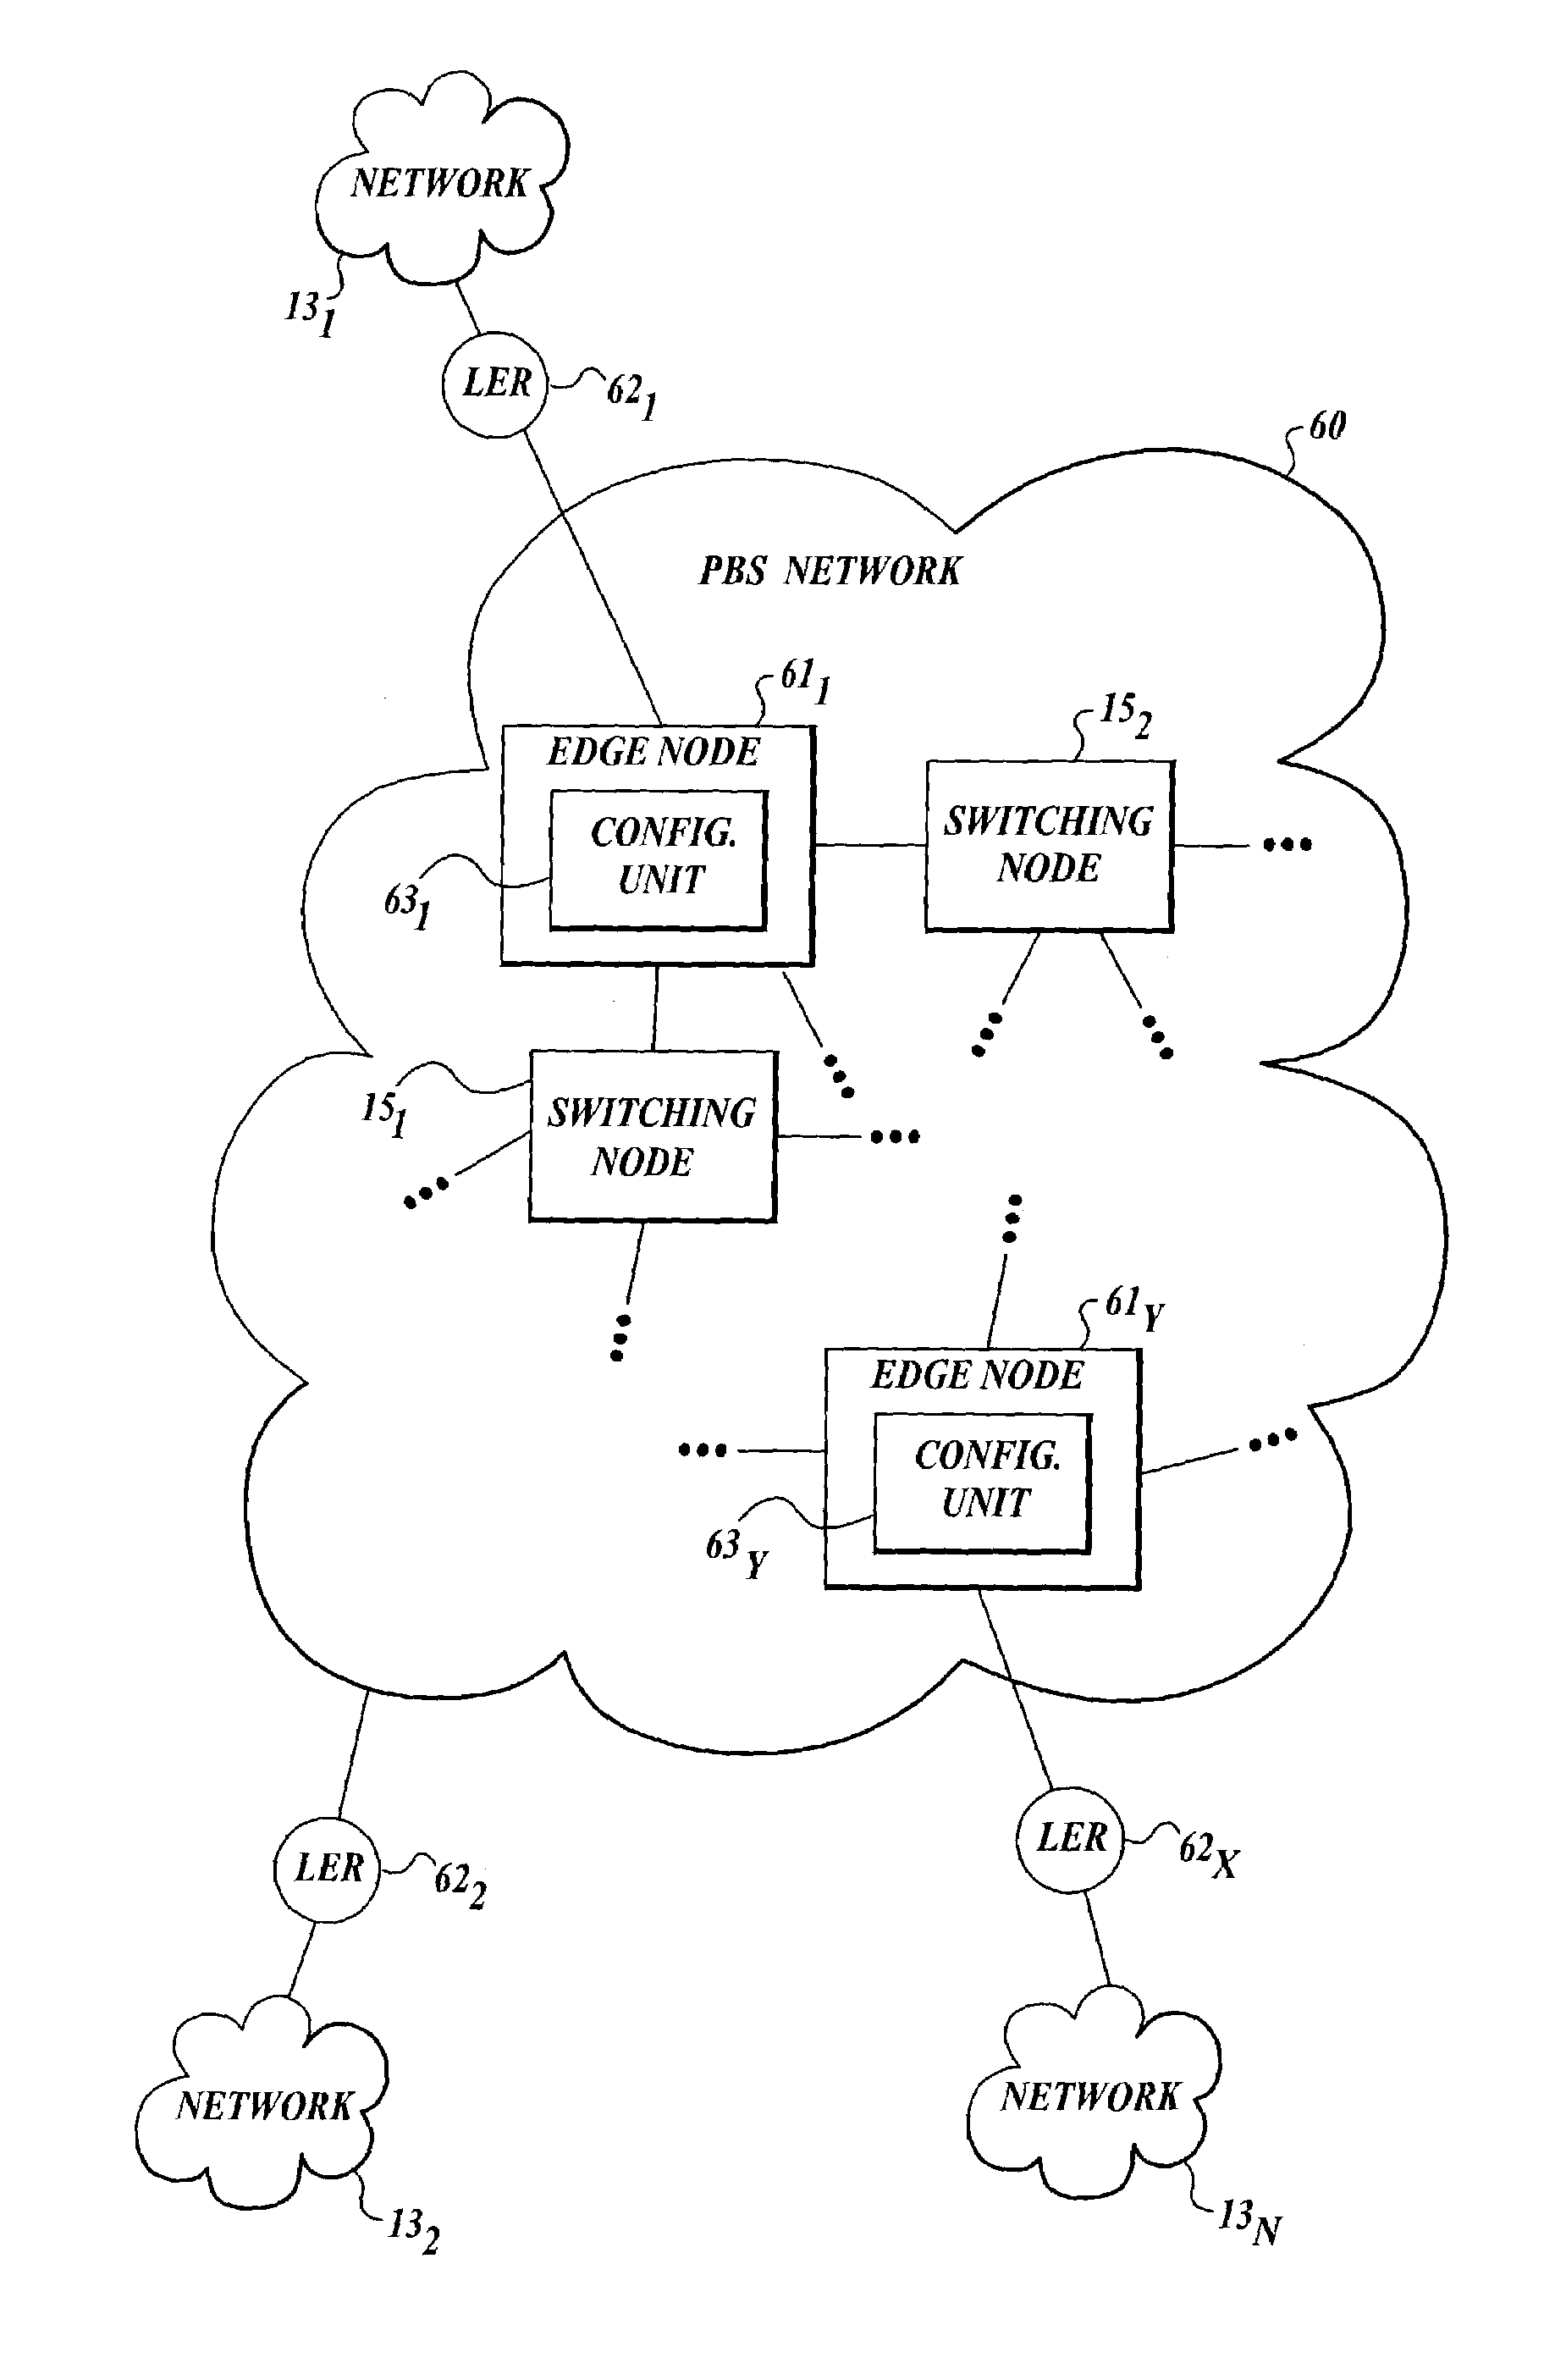 Architecture, method and system of multiple high-speed servers to network in WDM based photonic burst-switched networks